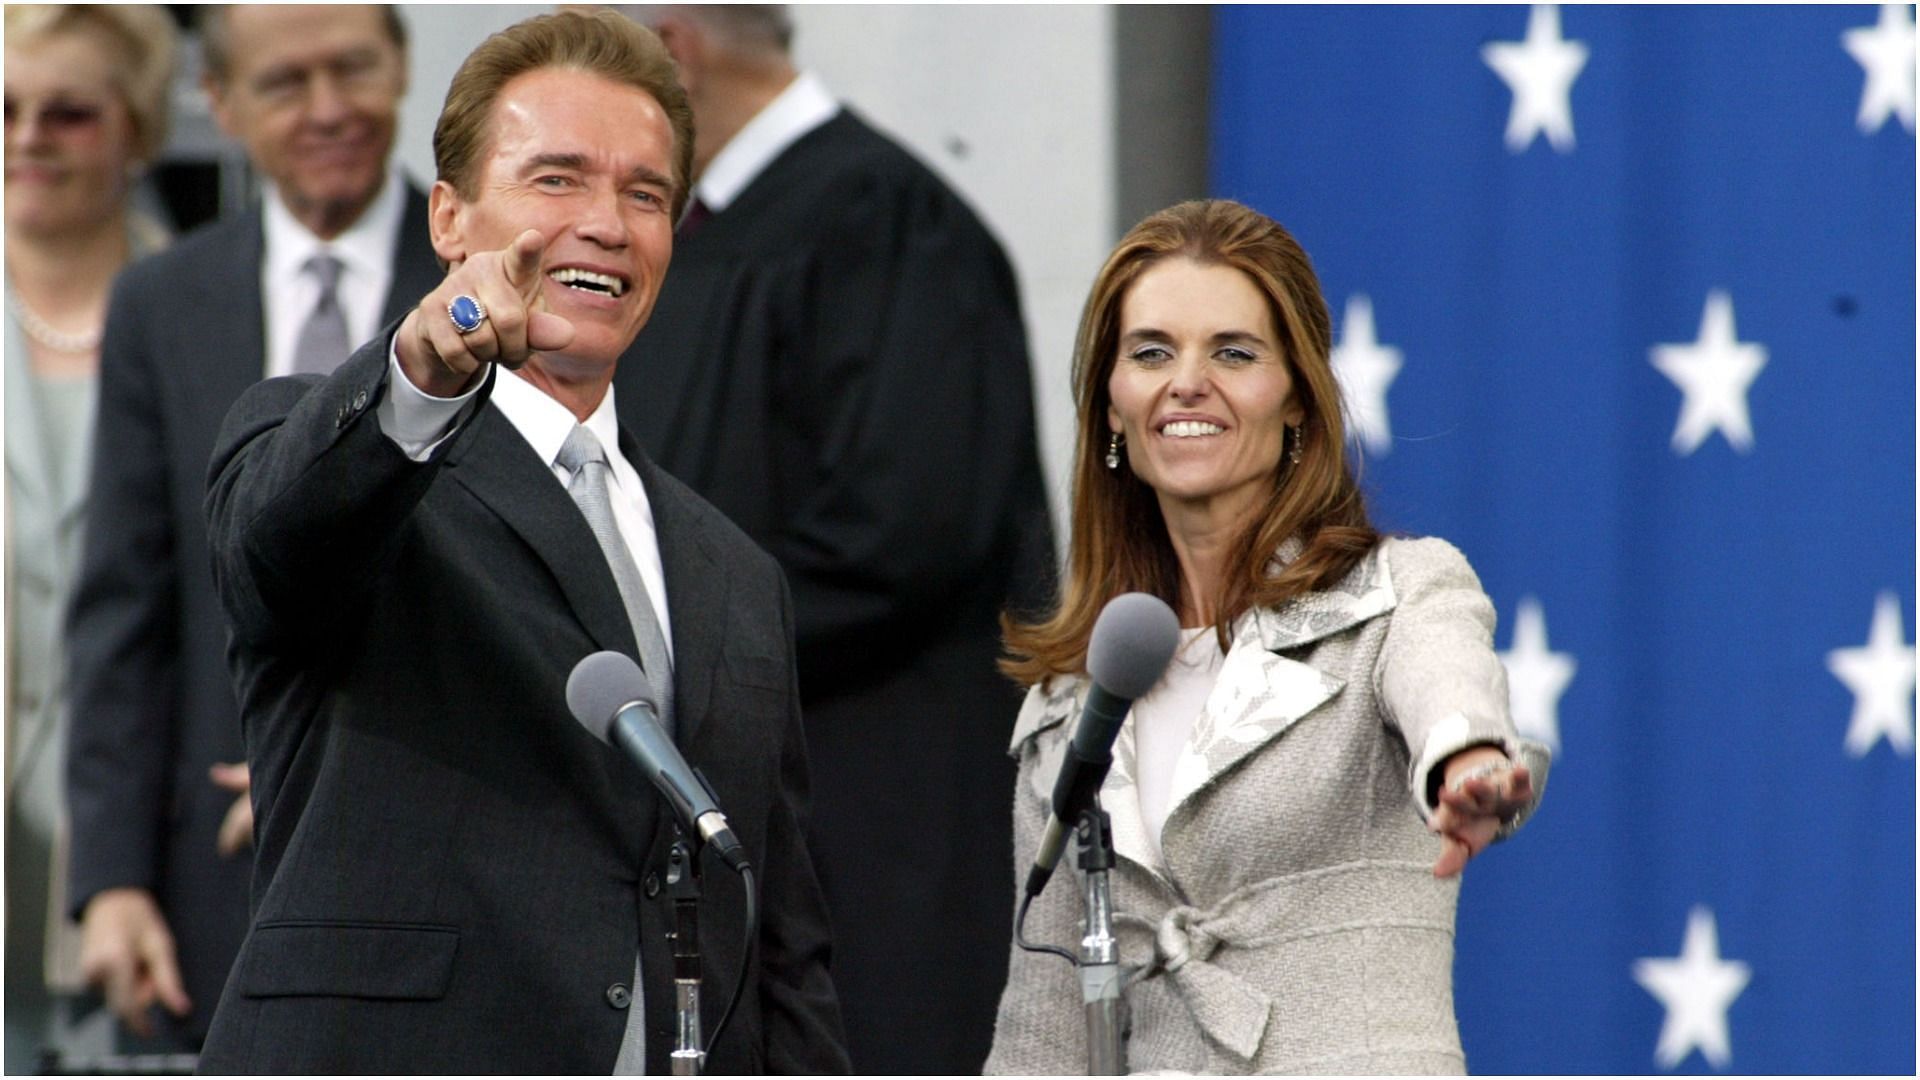 Arnold Schwarzenegger and wife Maria Shriver at the 38th Governor swearing-in ceremony in Sacramento, November 17, 2003 (Image via Getty Images)